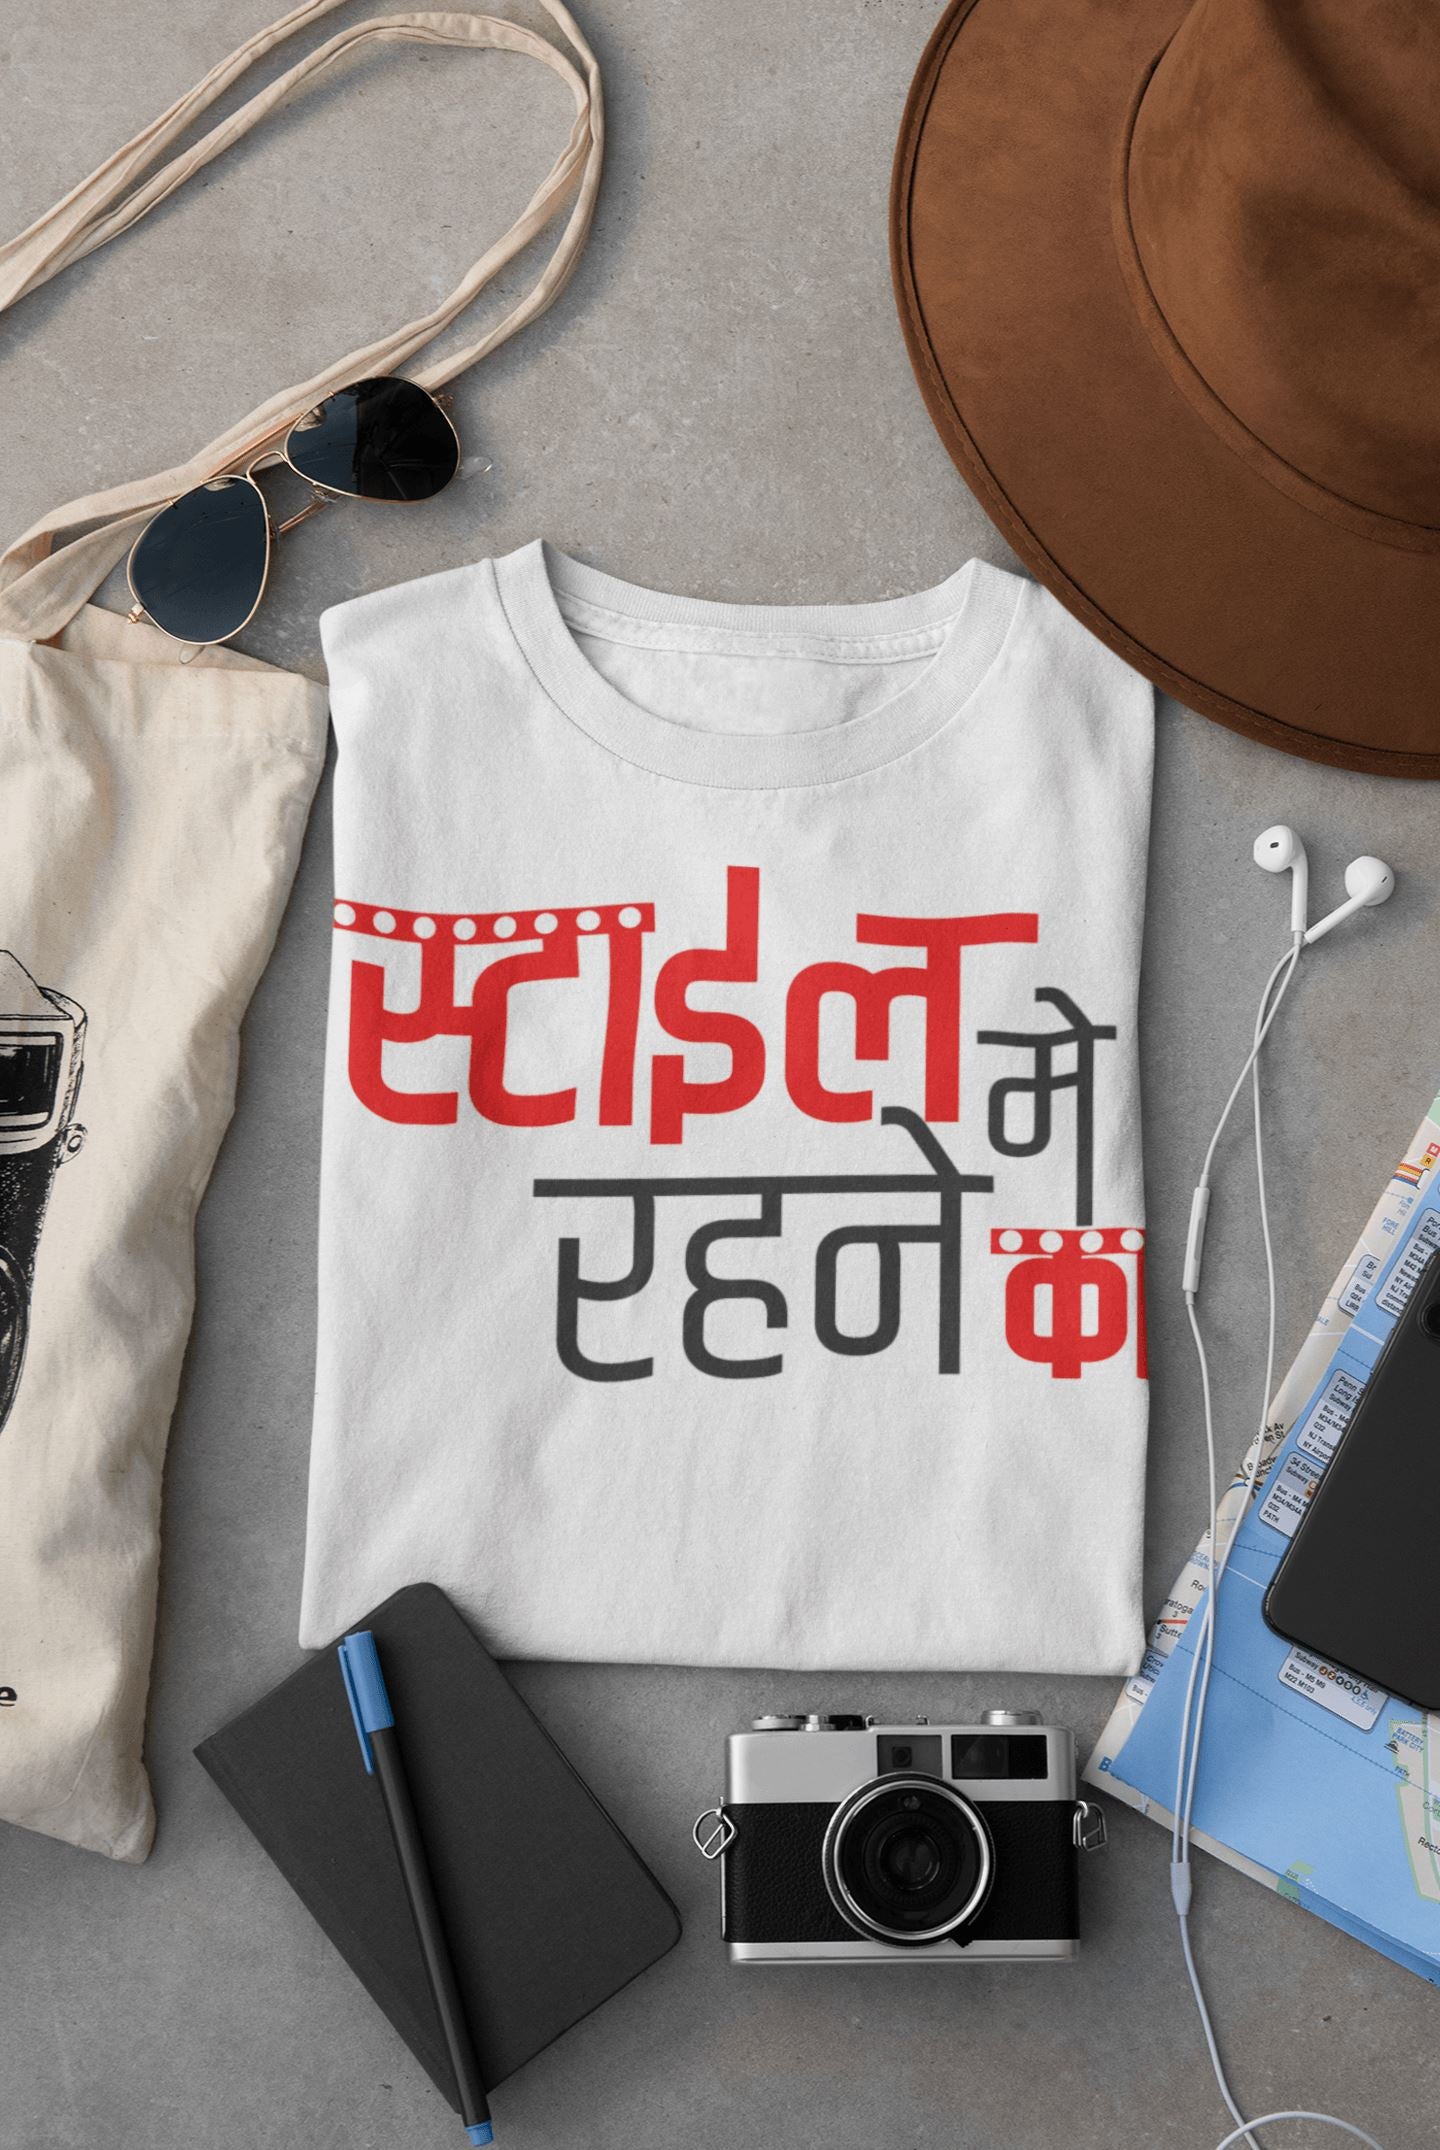 Style Main Rehne Ka Exclusive Hindi Swag T Shirt for Men and Women - Catch My Drift India  clothing, female, general, gym, made in india, movies, pop, shirt, t shirt, trending, tshirt, white